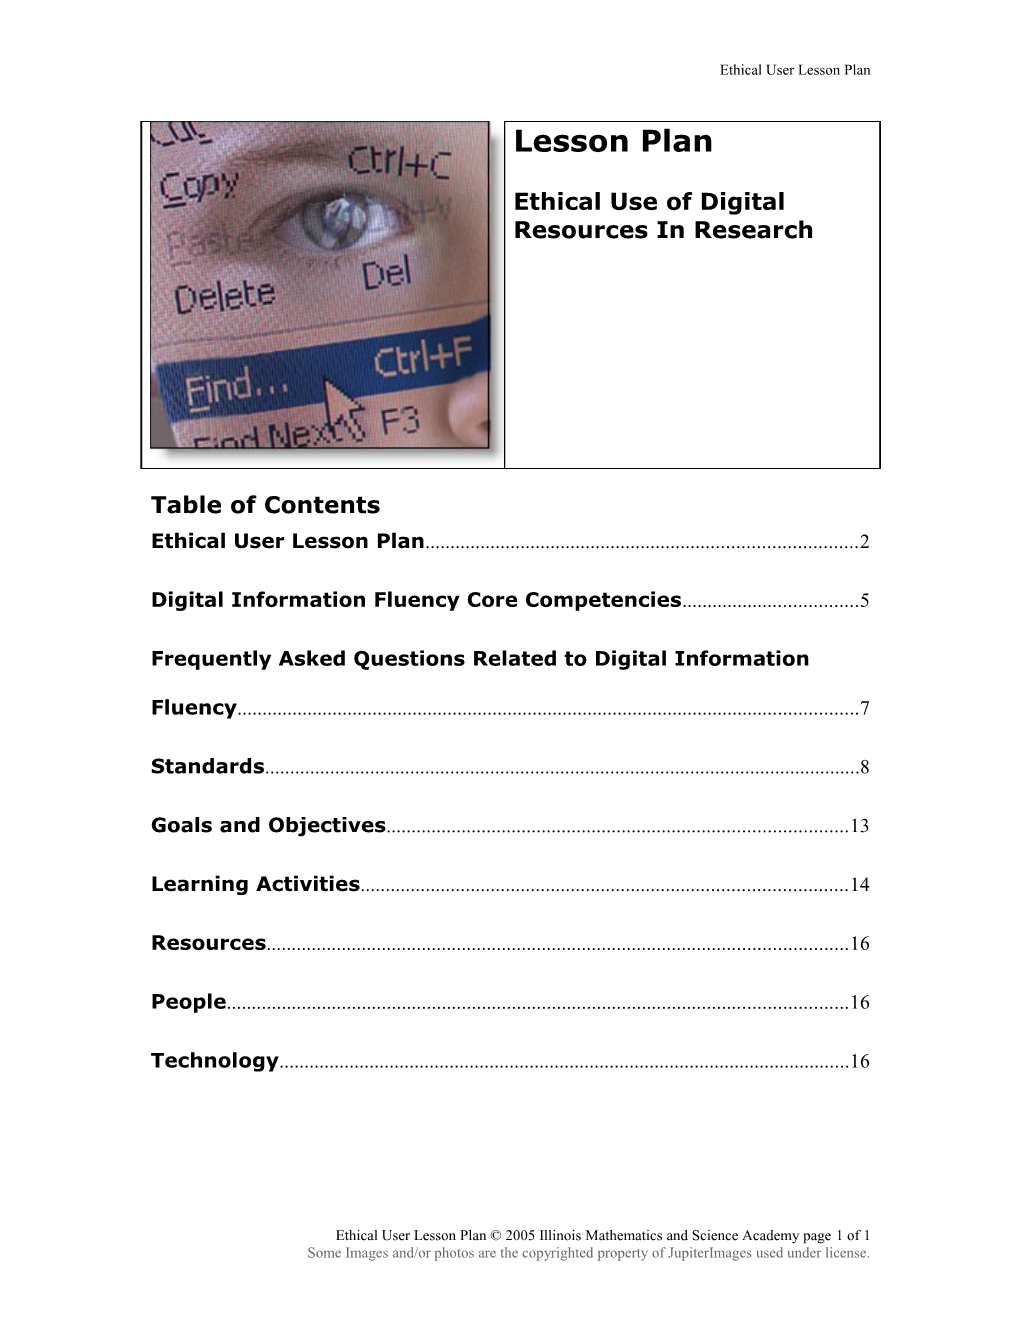 Evaluating Digital Information: the Teacher S Guide